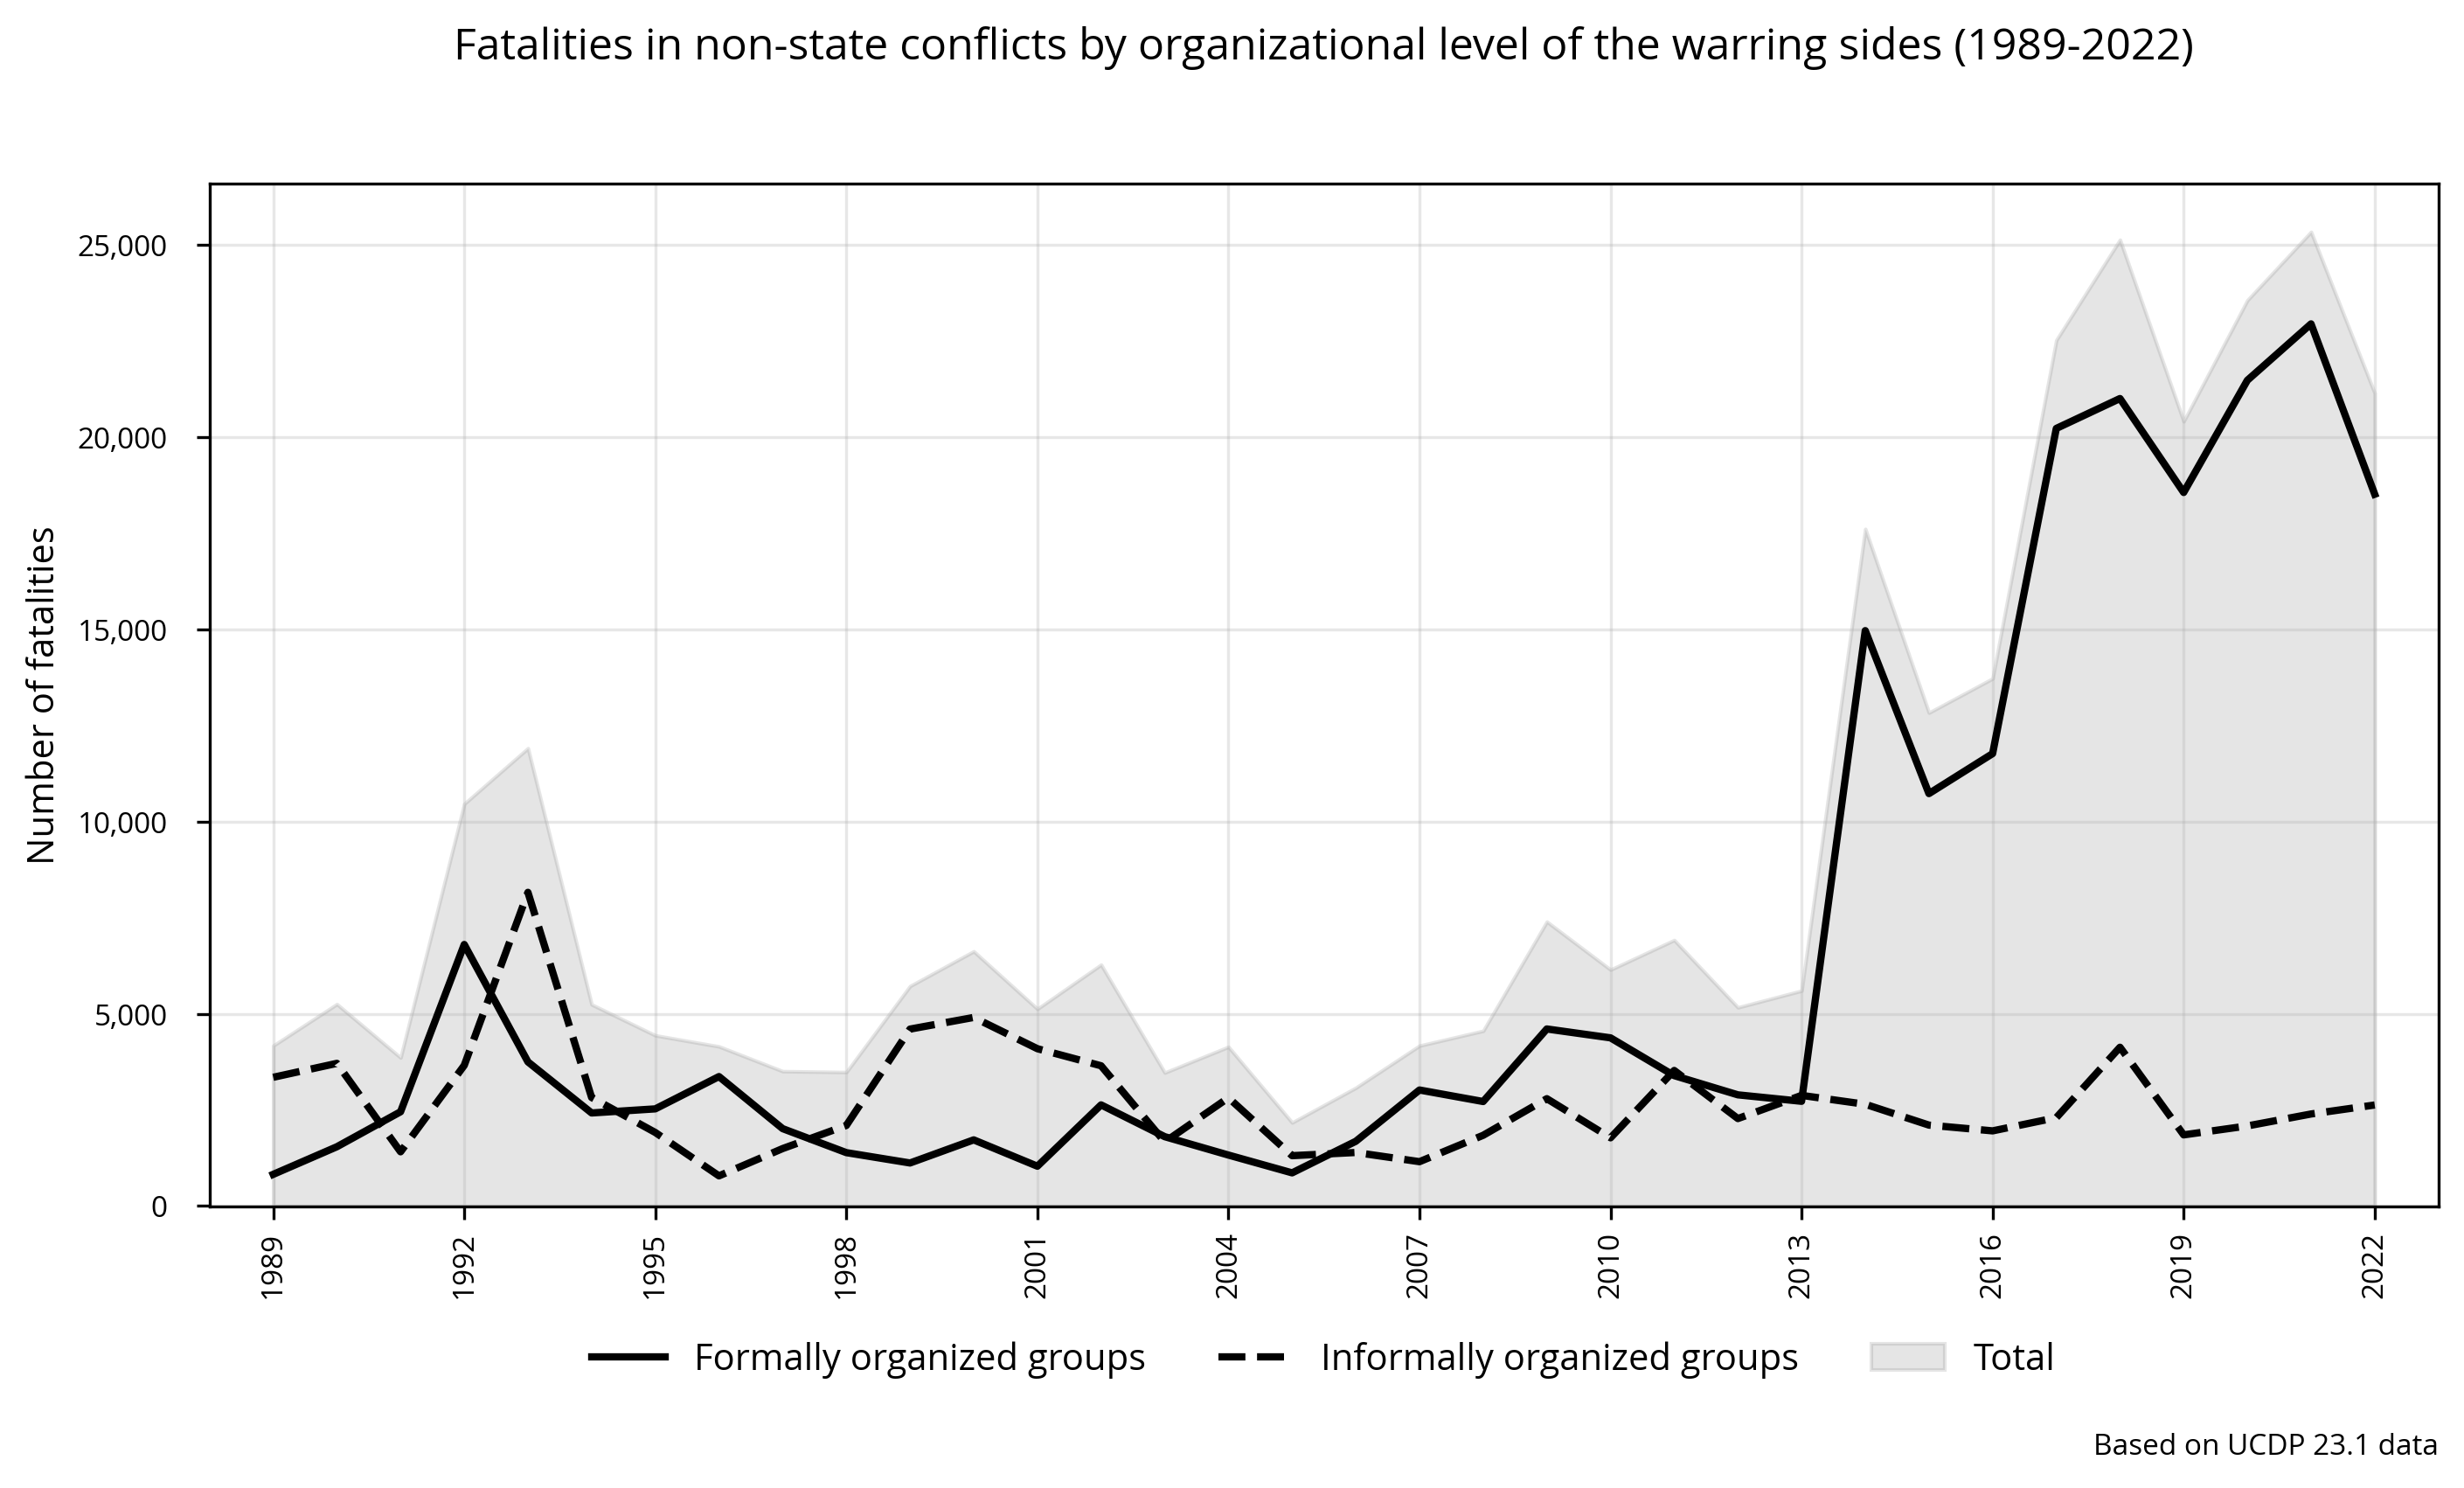 Non-state: Fatalities by organizational level of the warring sides